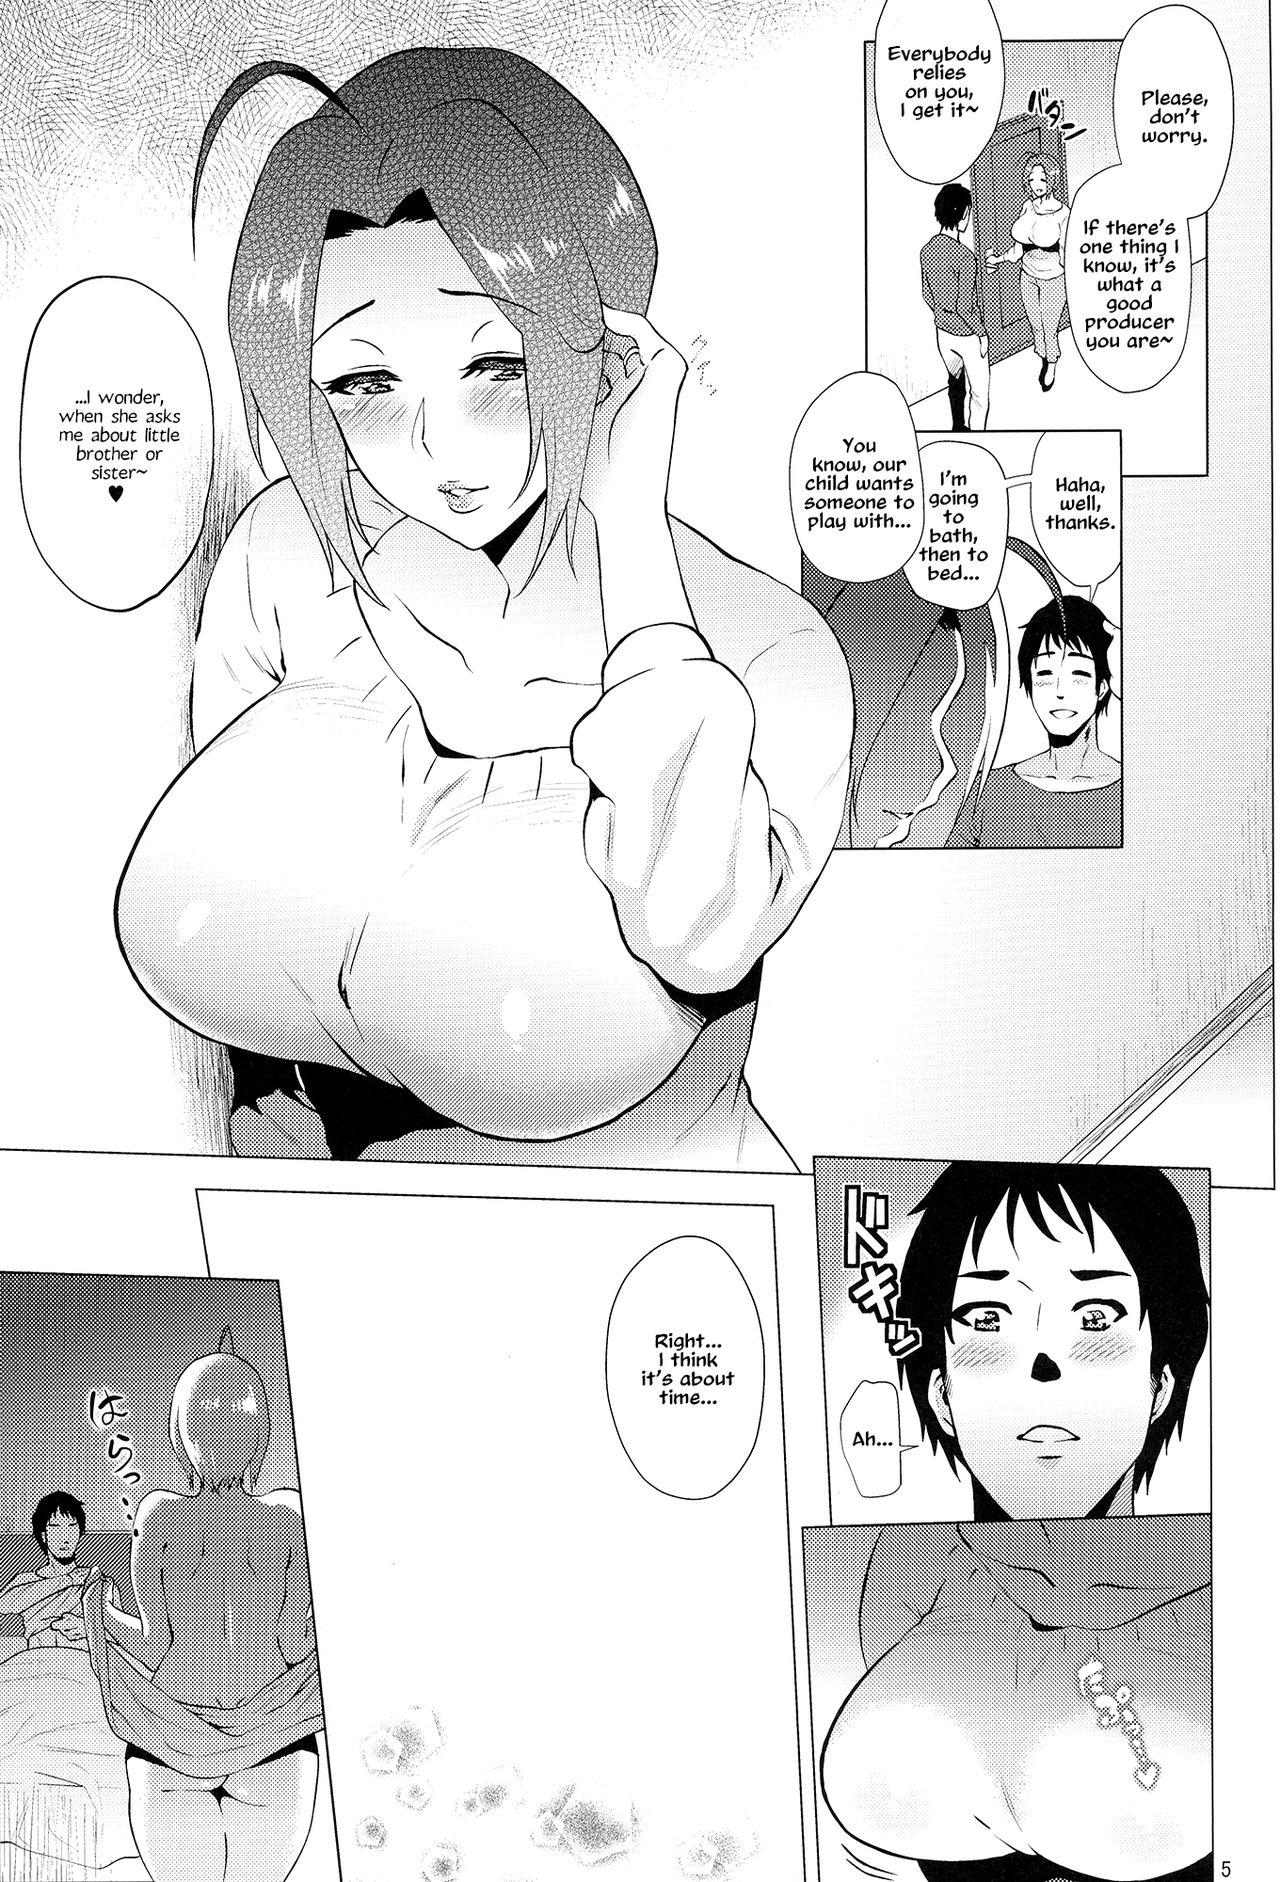 Lovers Itsumademo Anata to. | Forever Together - The idolmaster Jerkoff - Page 5